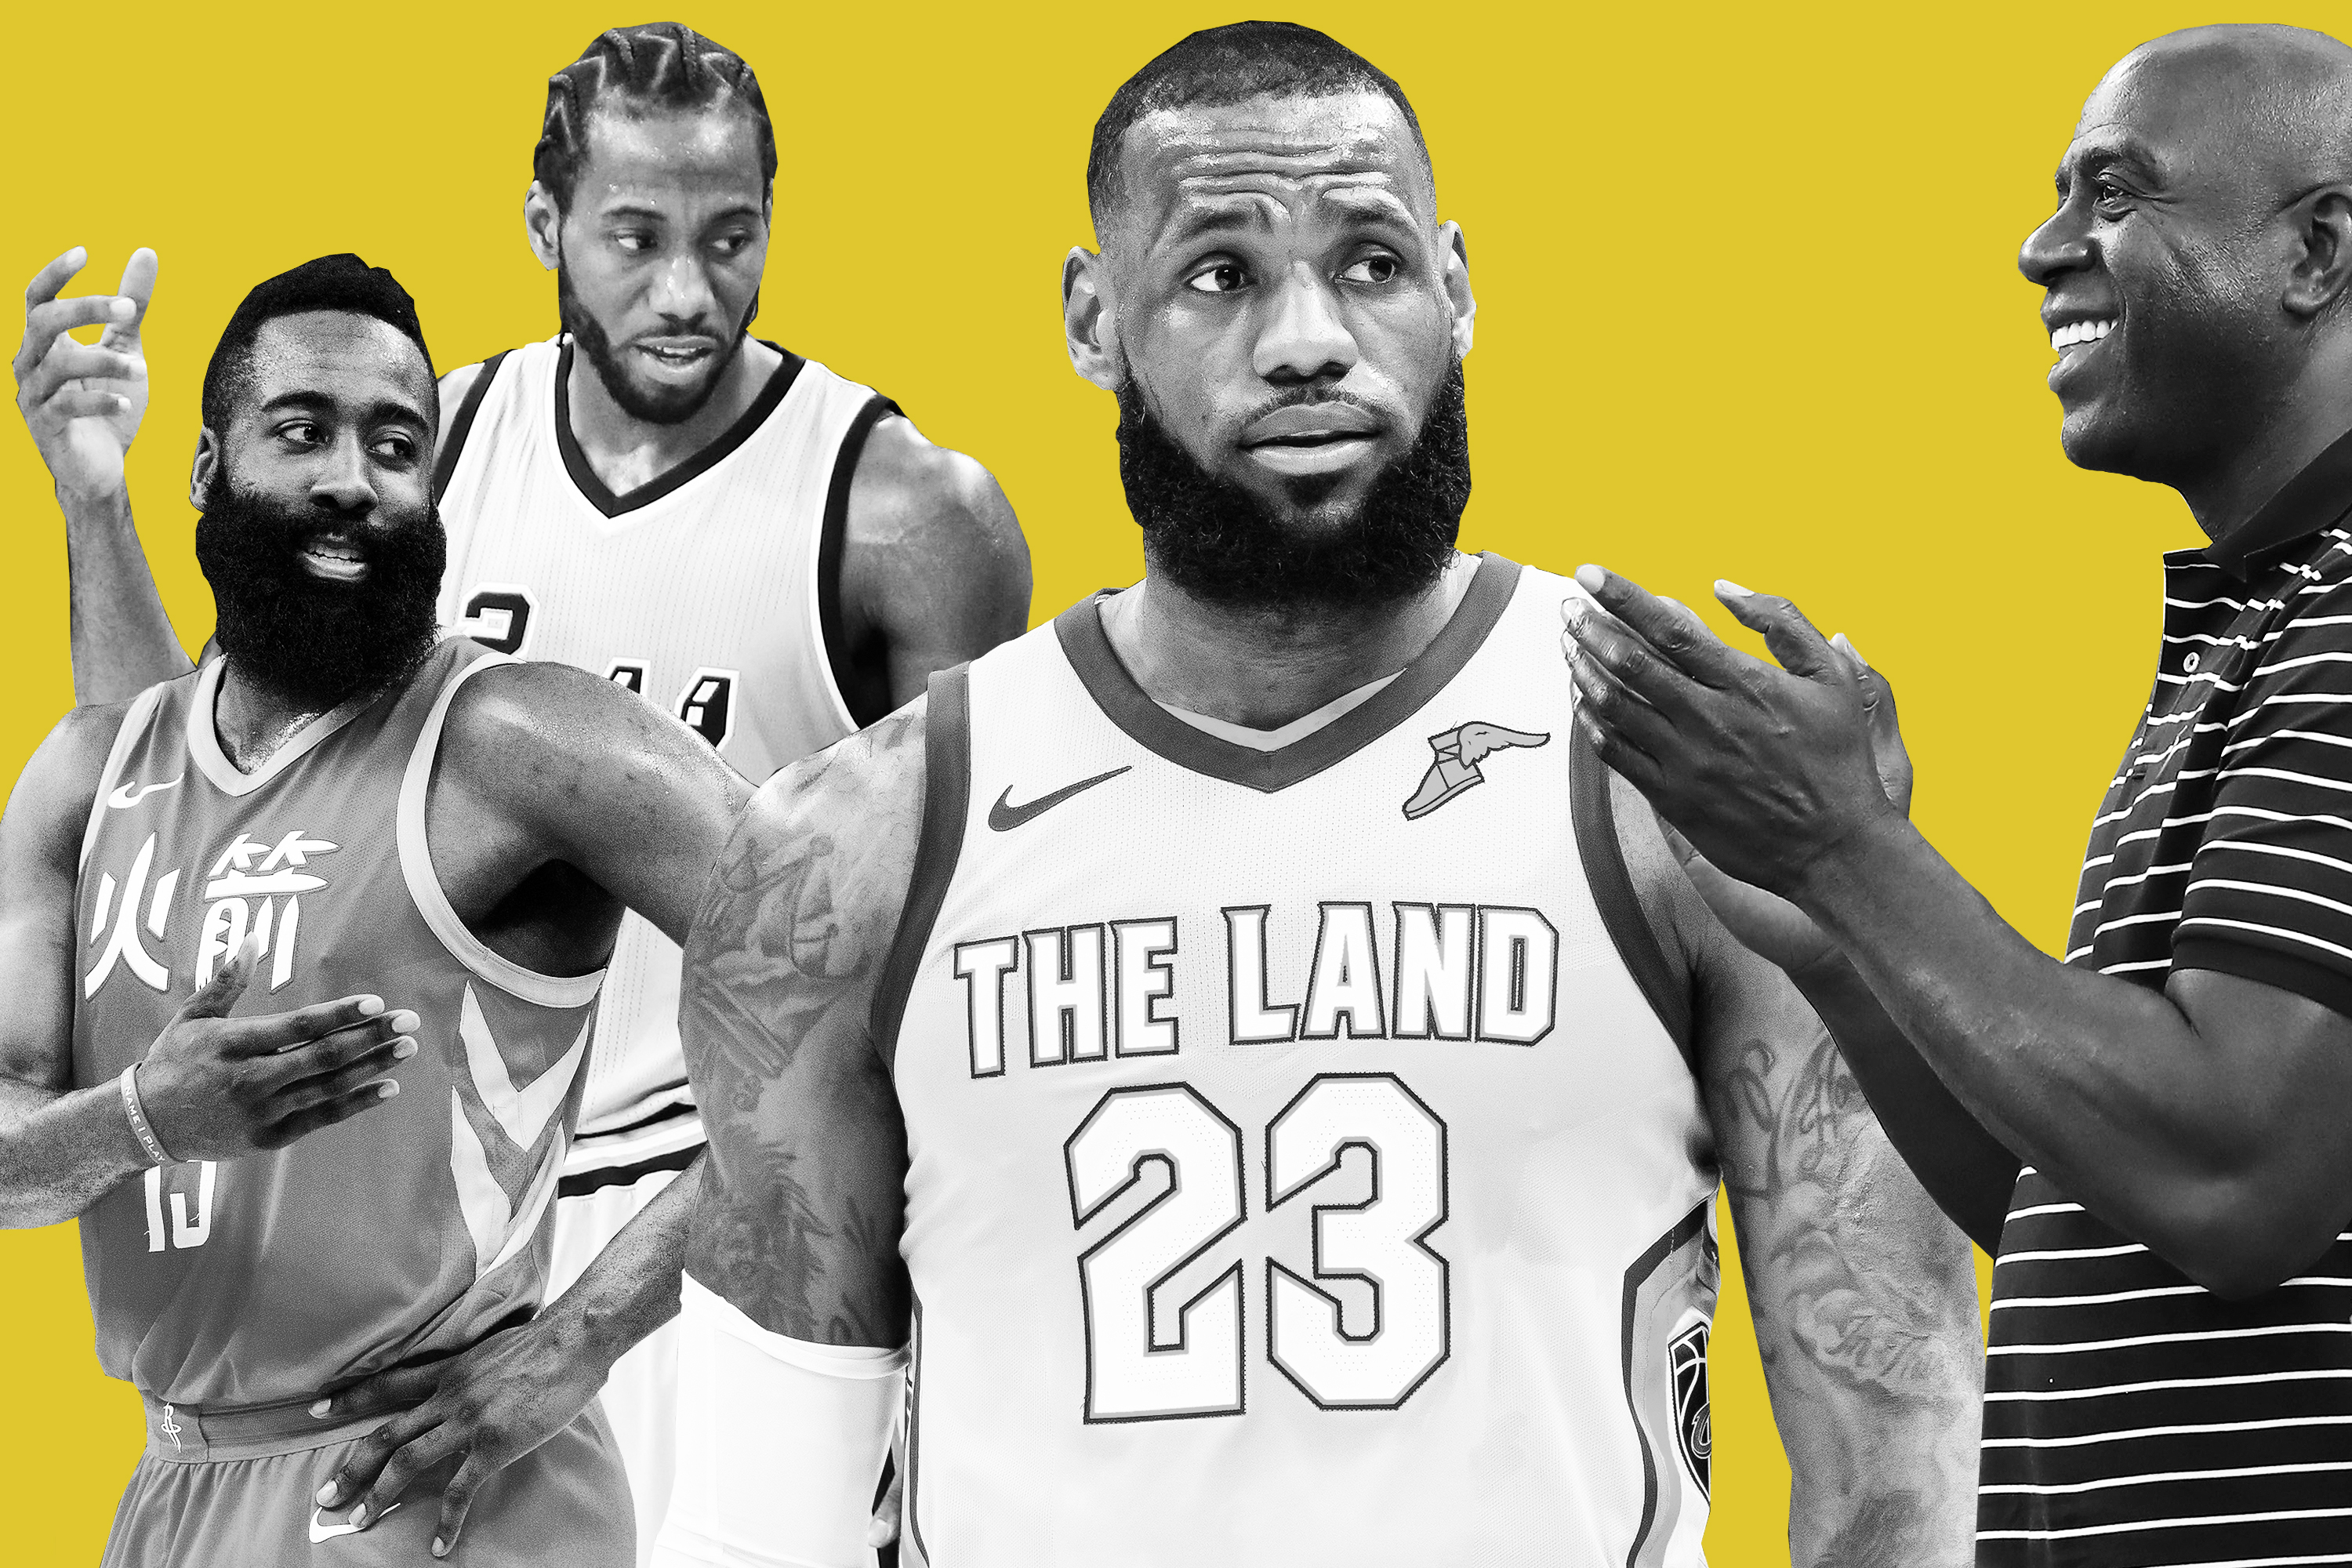 LeBron James won't have his Banana Boat Crew in the NBA All-Star Game 